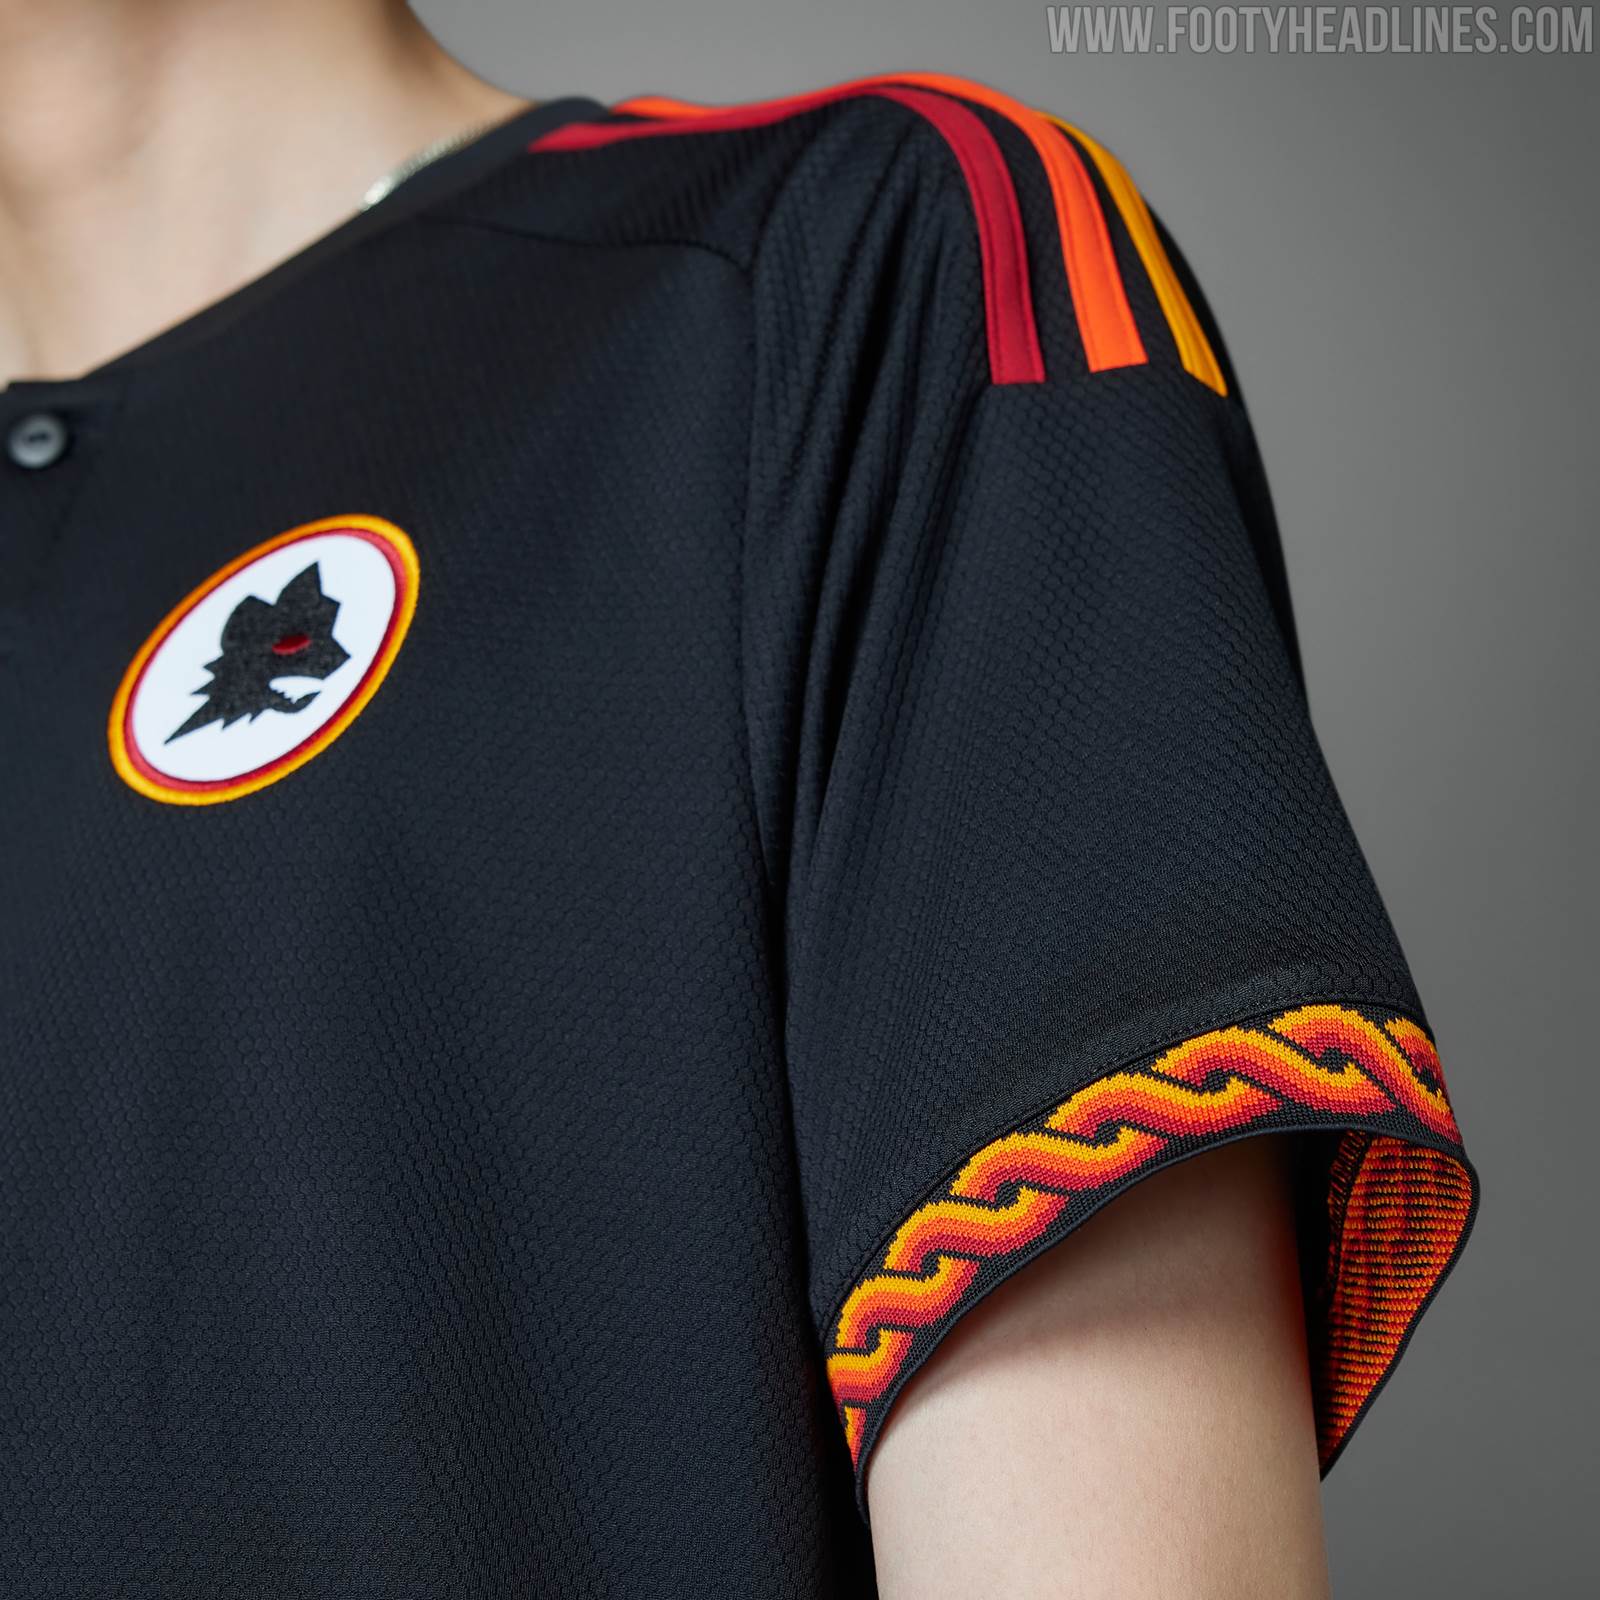 Roma just dropped their new THIRD kit and it comes with a